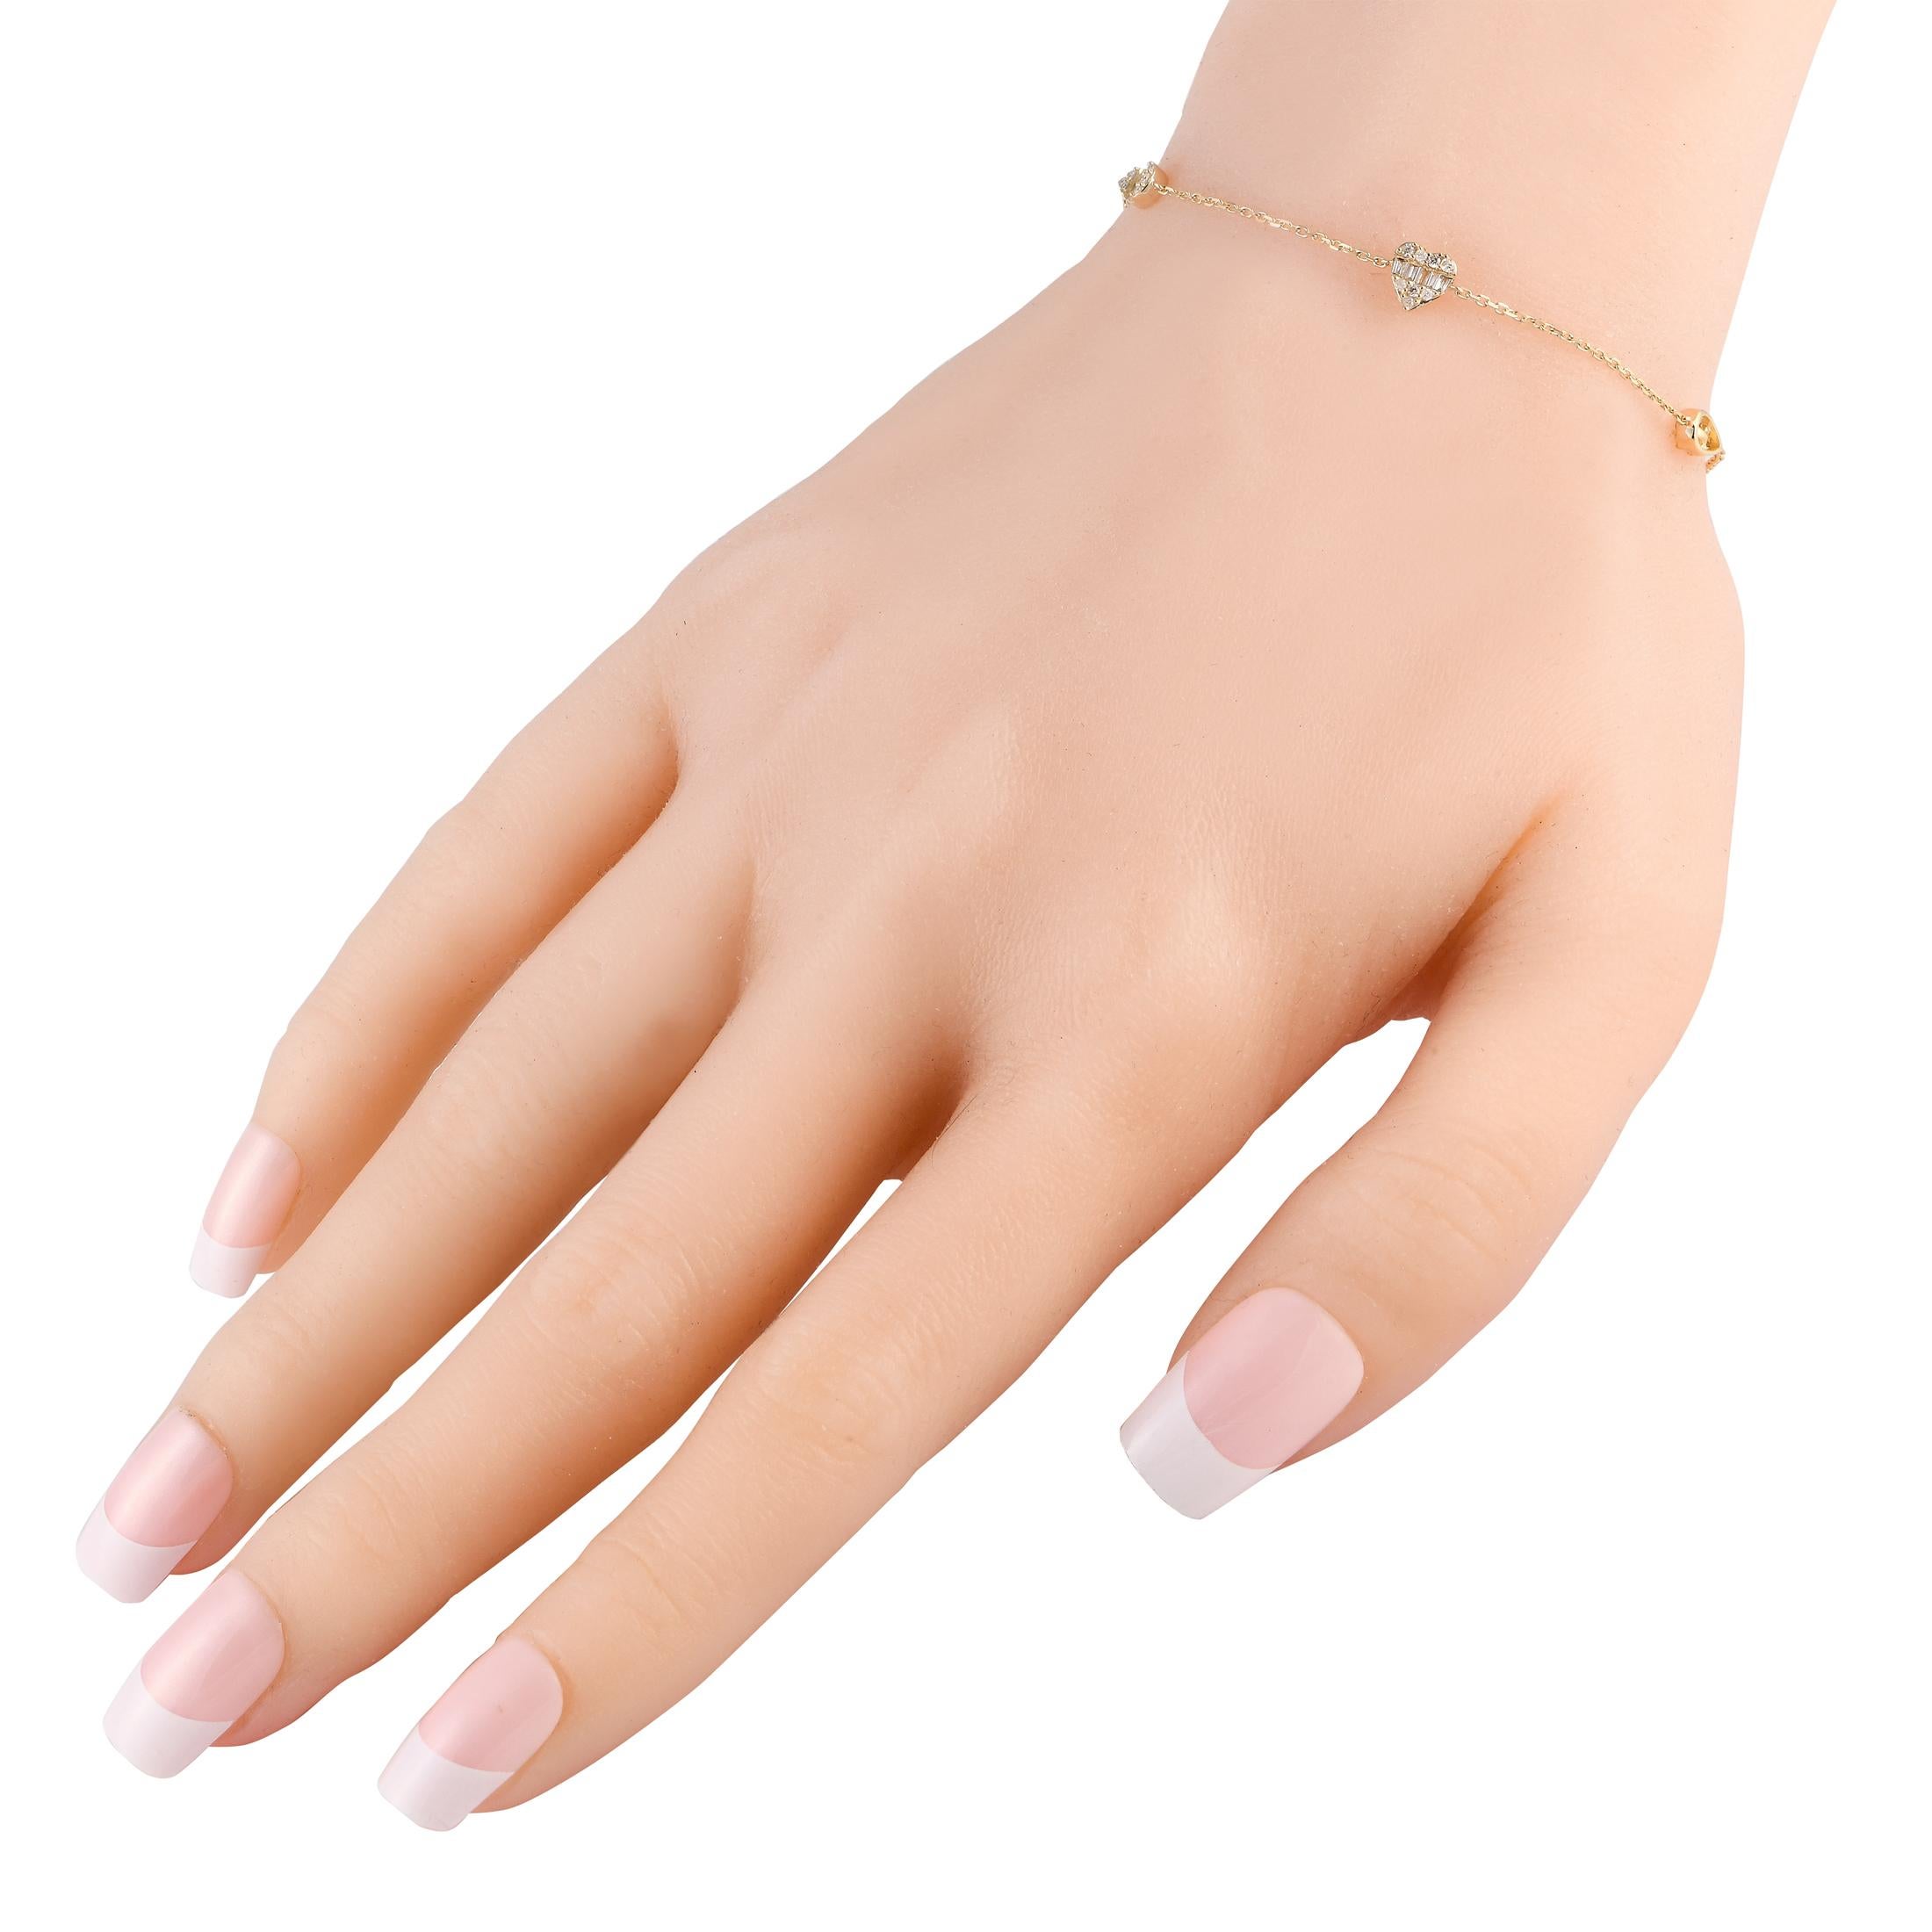 This is an easy, everyday jewel for adding just the perfectly sweet touch of sparkle to your outfits. This bracelet in 14K yellow gold features two pear-shaped bezels and one heart-shaped bezel all adorned with a sparkling blend of round and